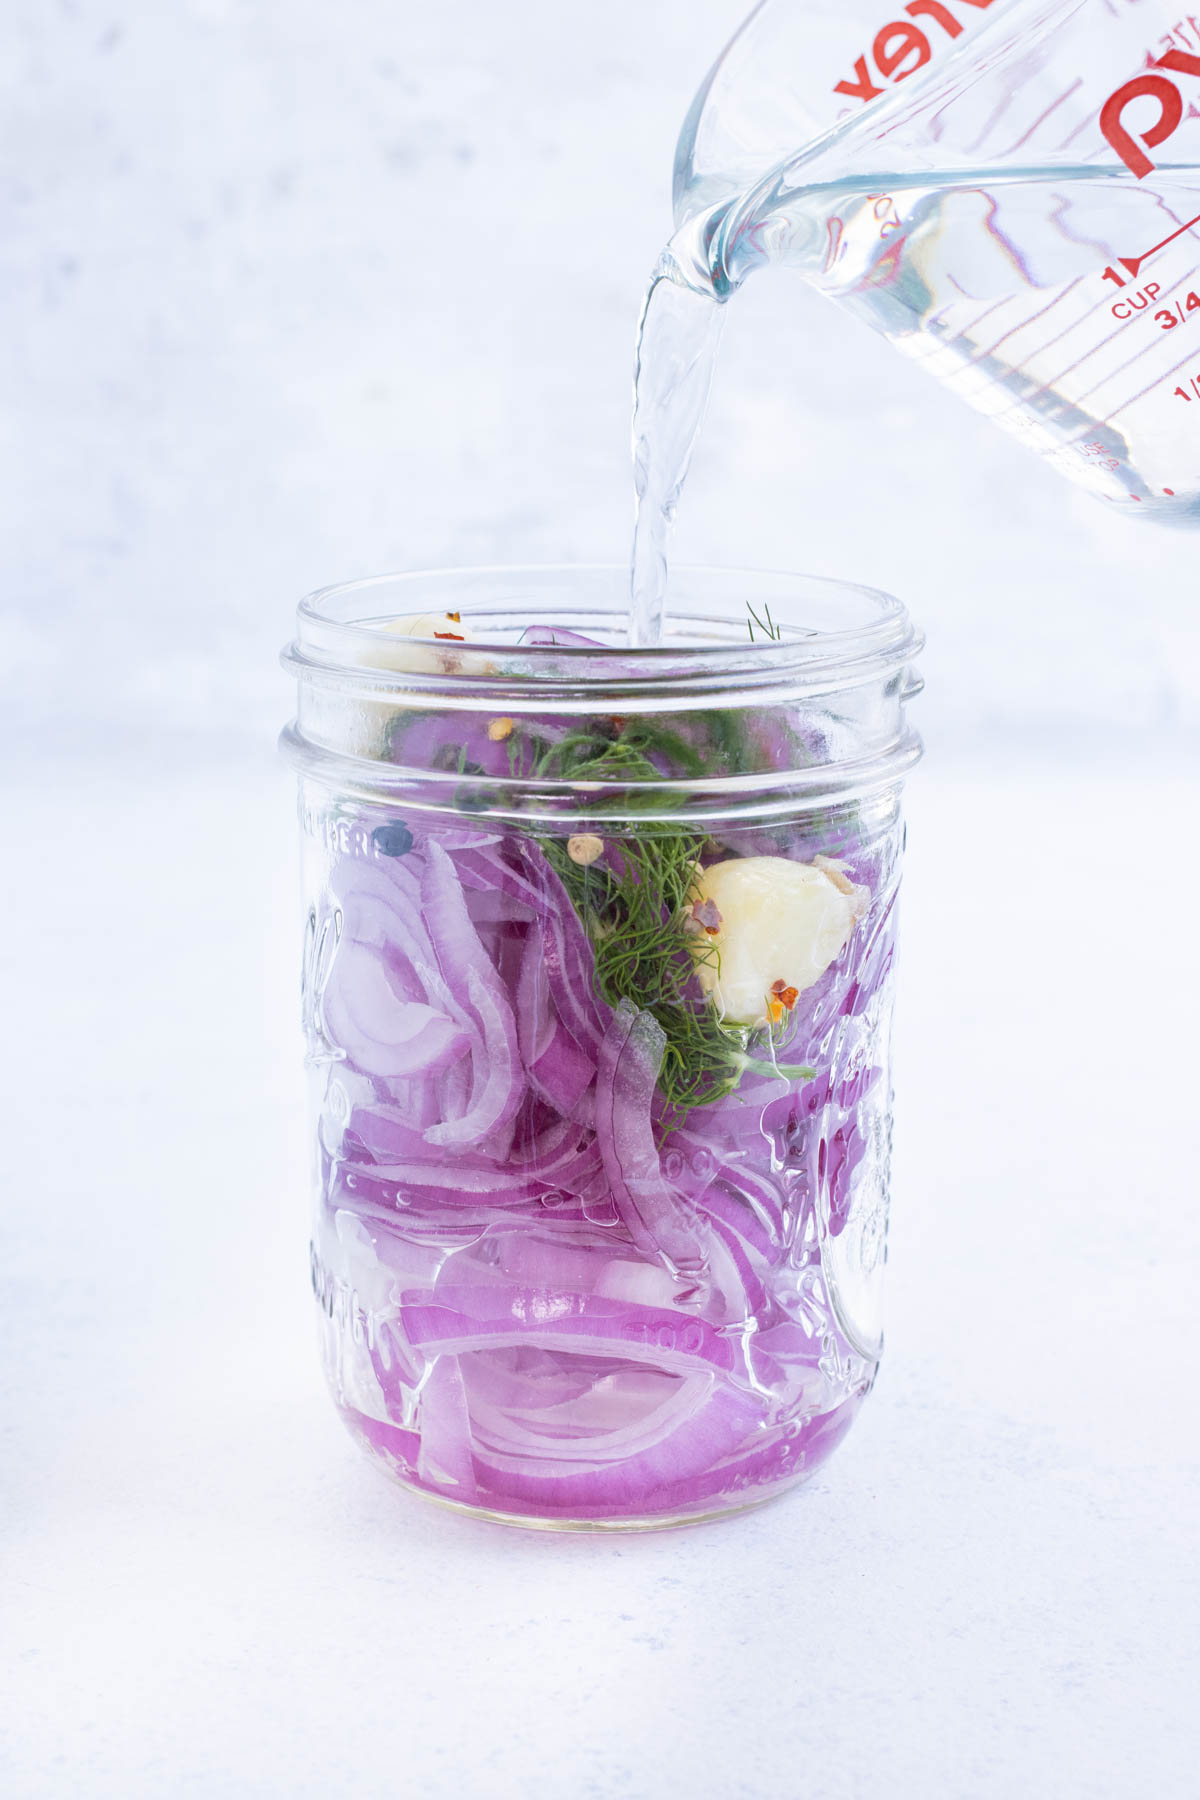 Water is added to a jar with onions and pickling solution.